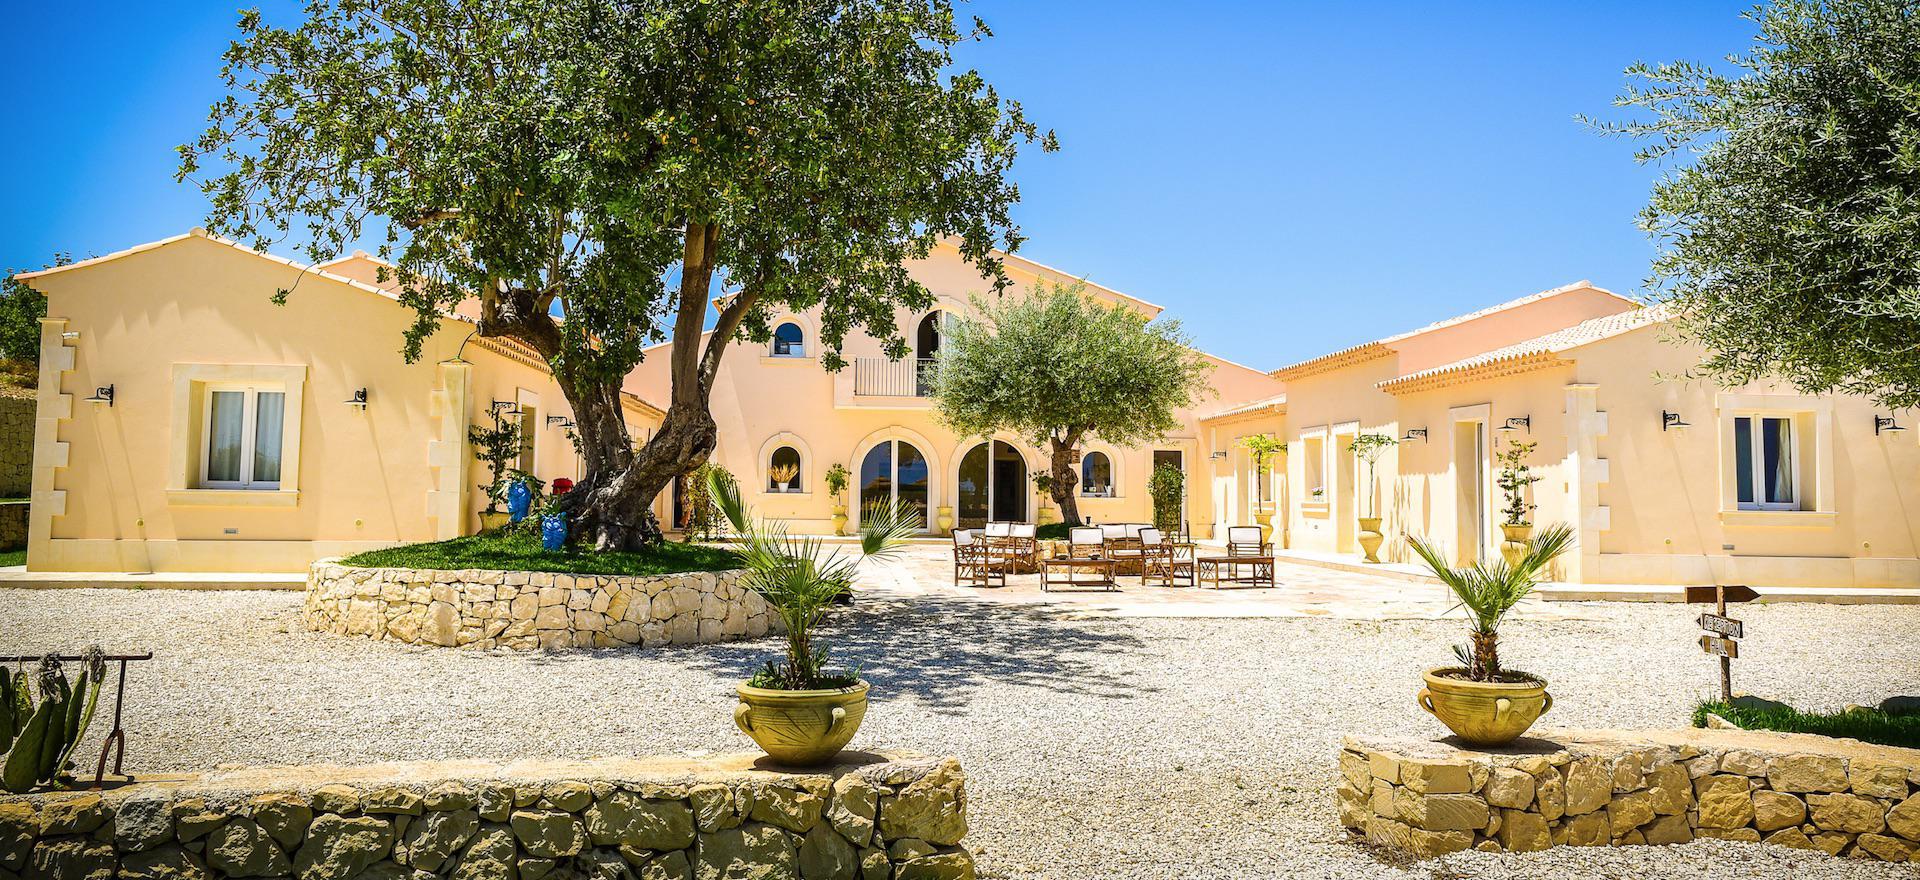 Agriturismo Sicily Superb agriturismo with a view of Noto and near the sea